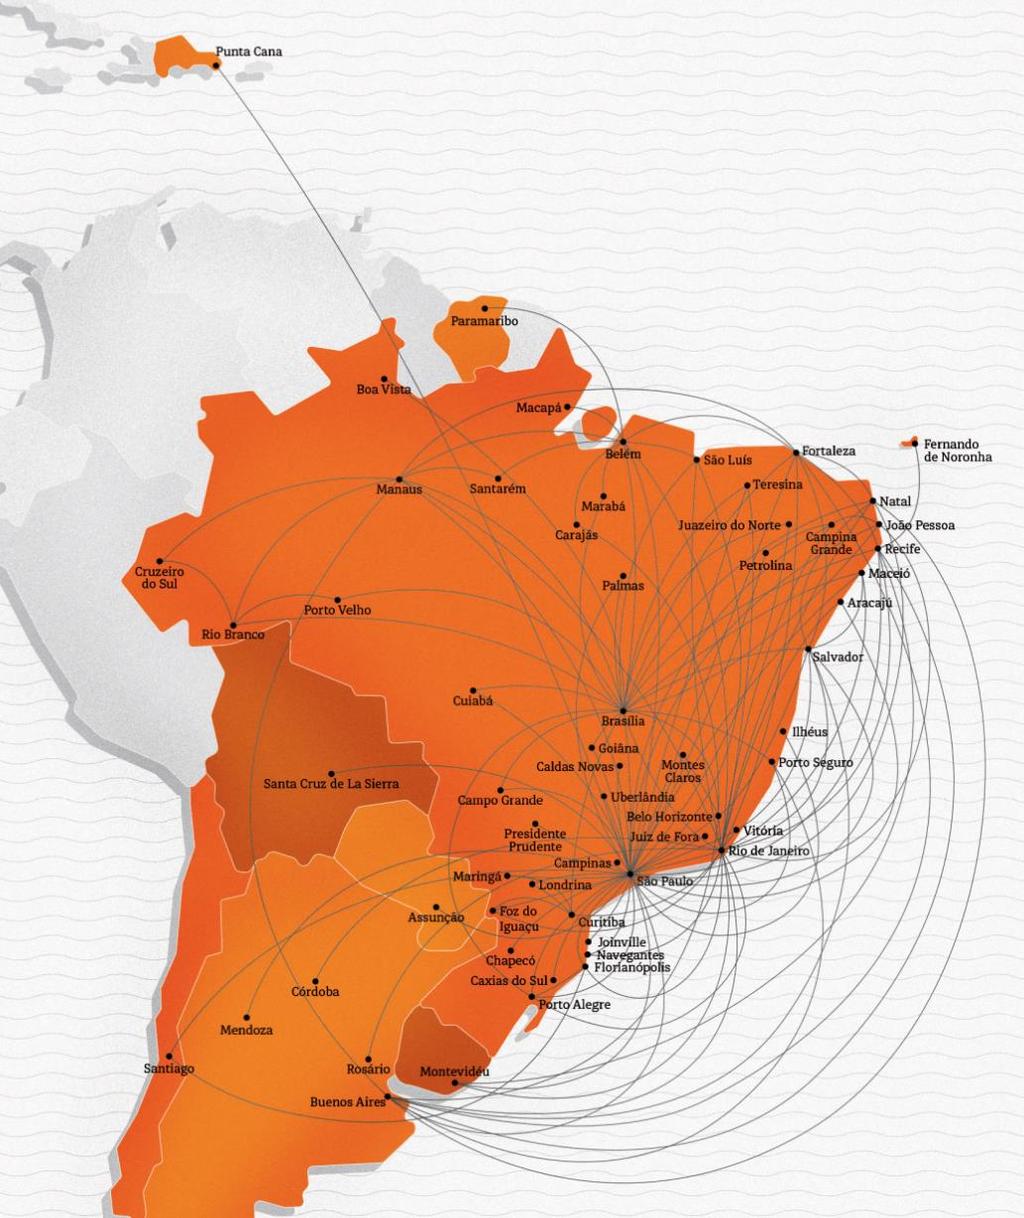 GOL is Brazil s favorite airline Brazil s # 1 Airline #1 in network #1 in business traffic #1 in